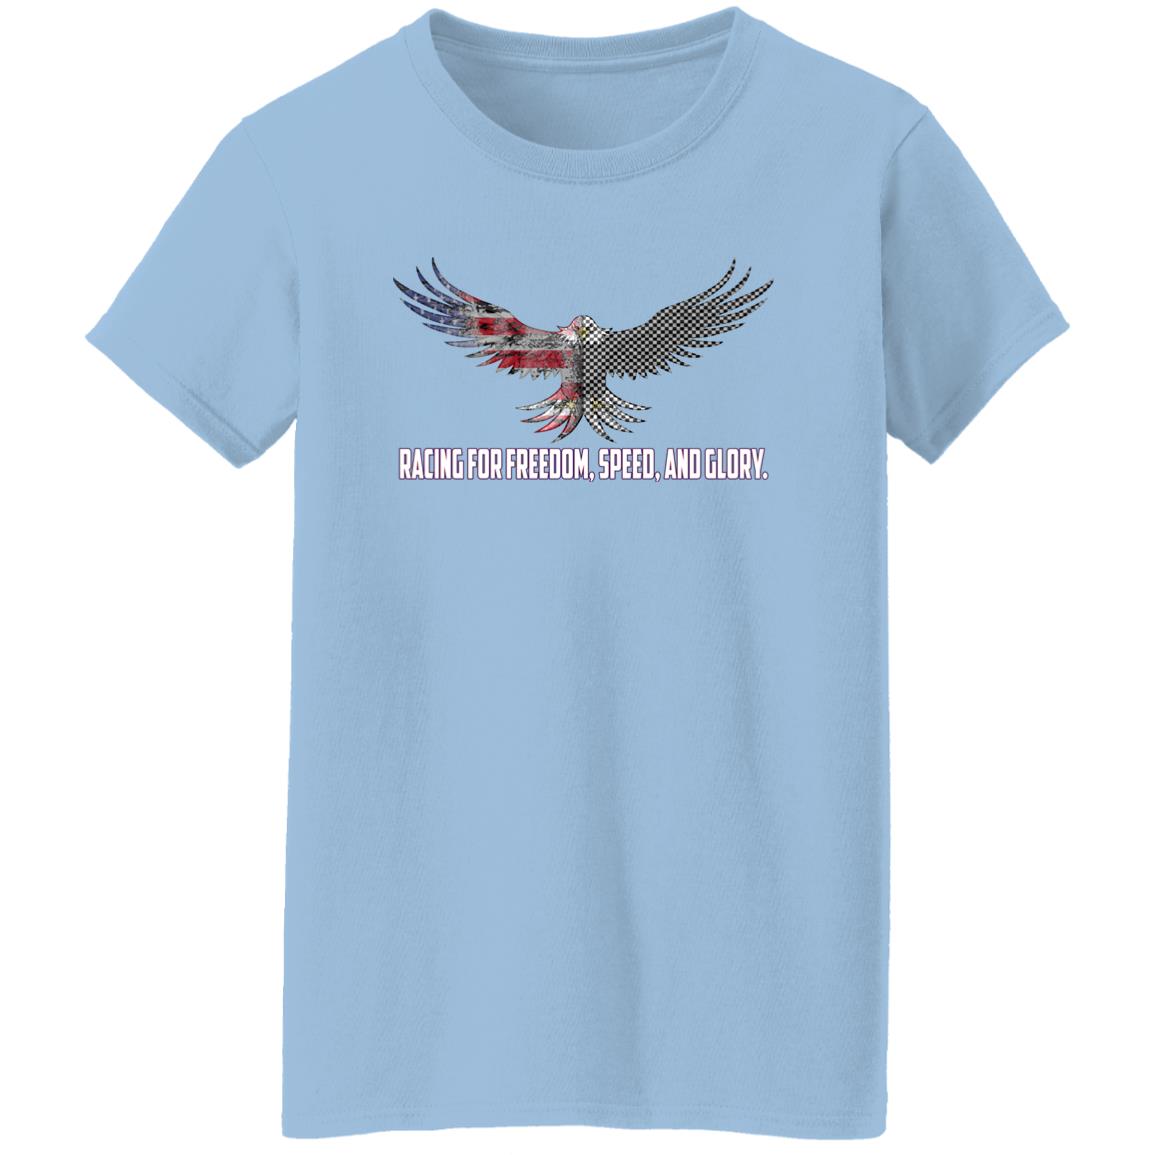 Racing For Freedom, Speed, And Glory Ladies' 5.3 oz. T-Shirt